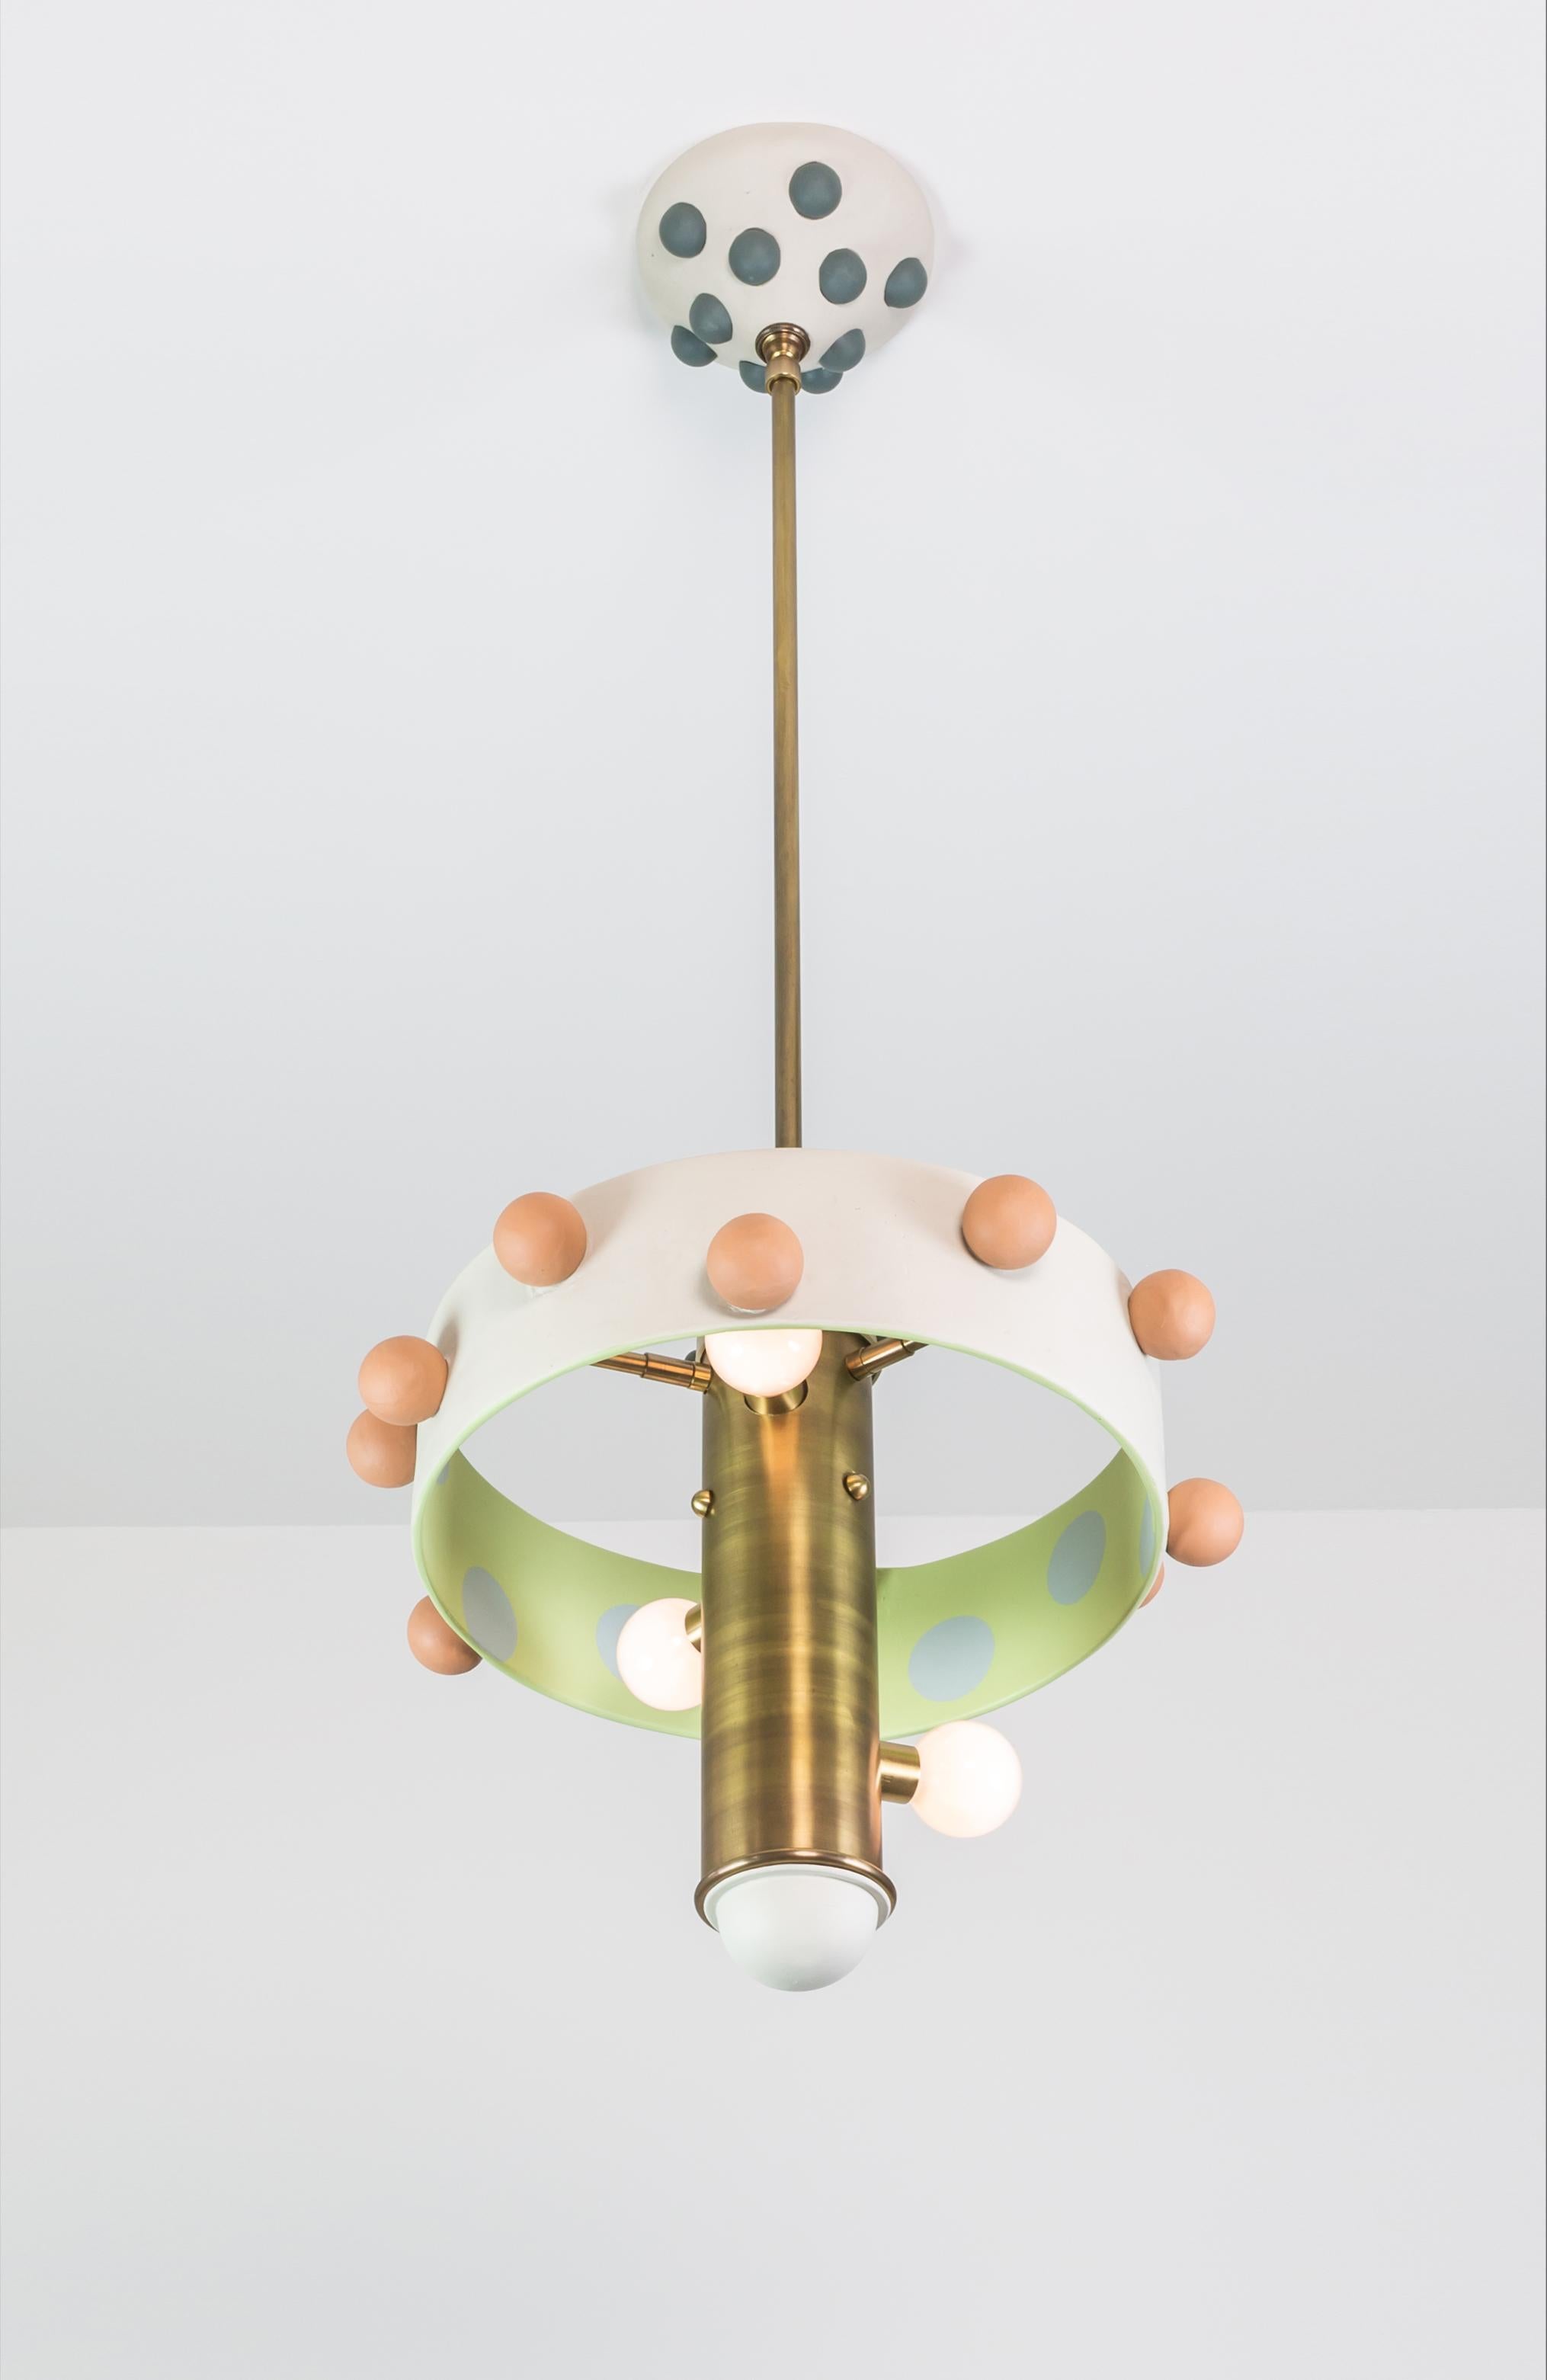 Amy is a pendant light, part of the Posse collection; a system designed around the core ideas of collaboration and play.

The pendant is created to give the customer freedom in tailoring their own expression. The design is centered around a common